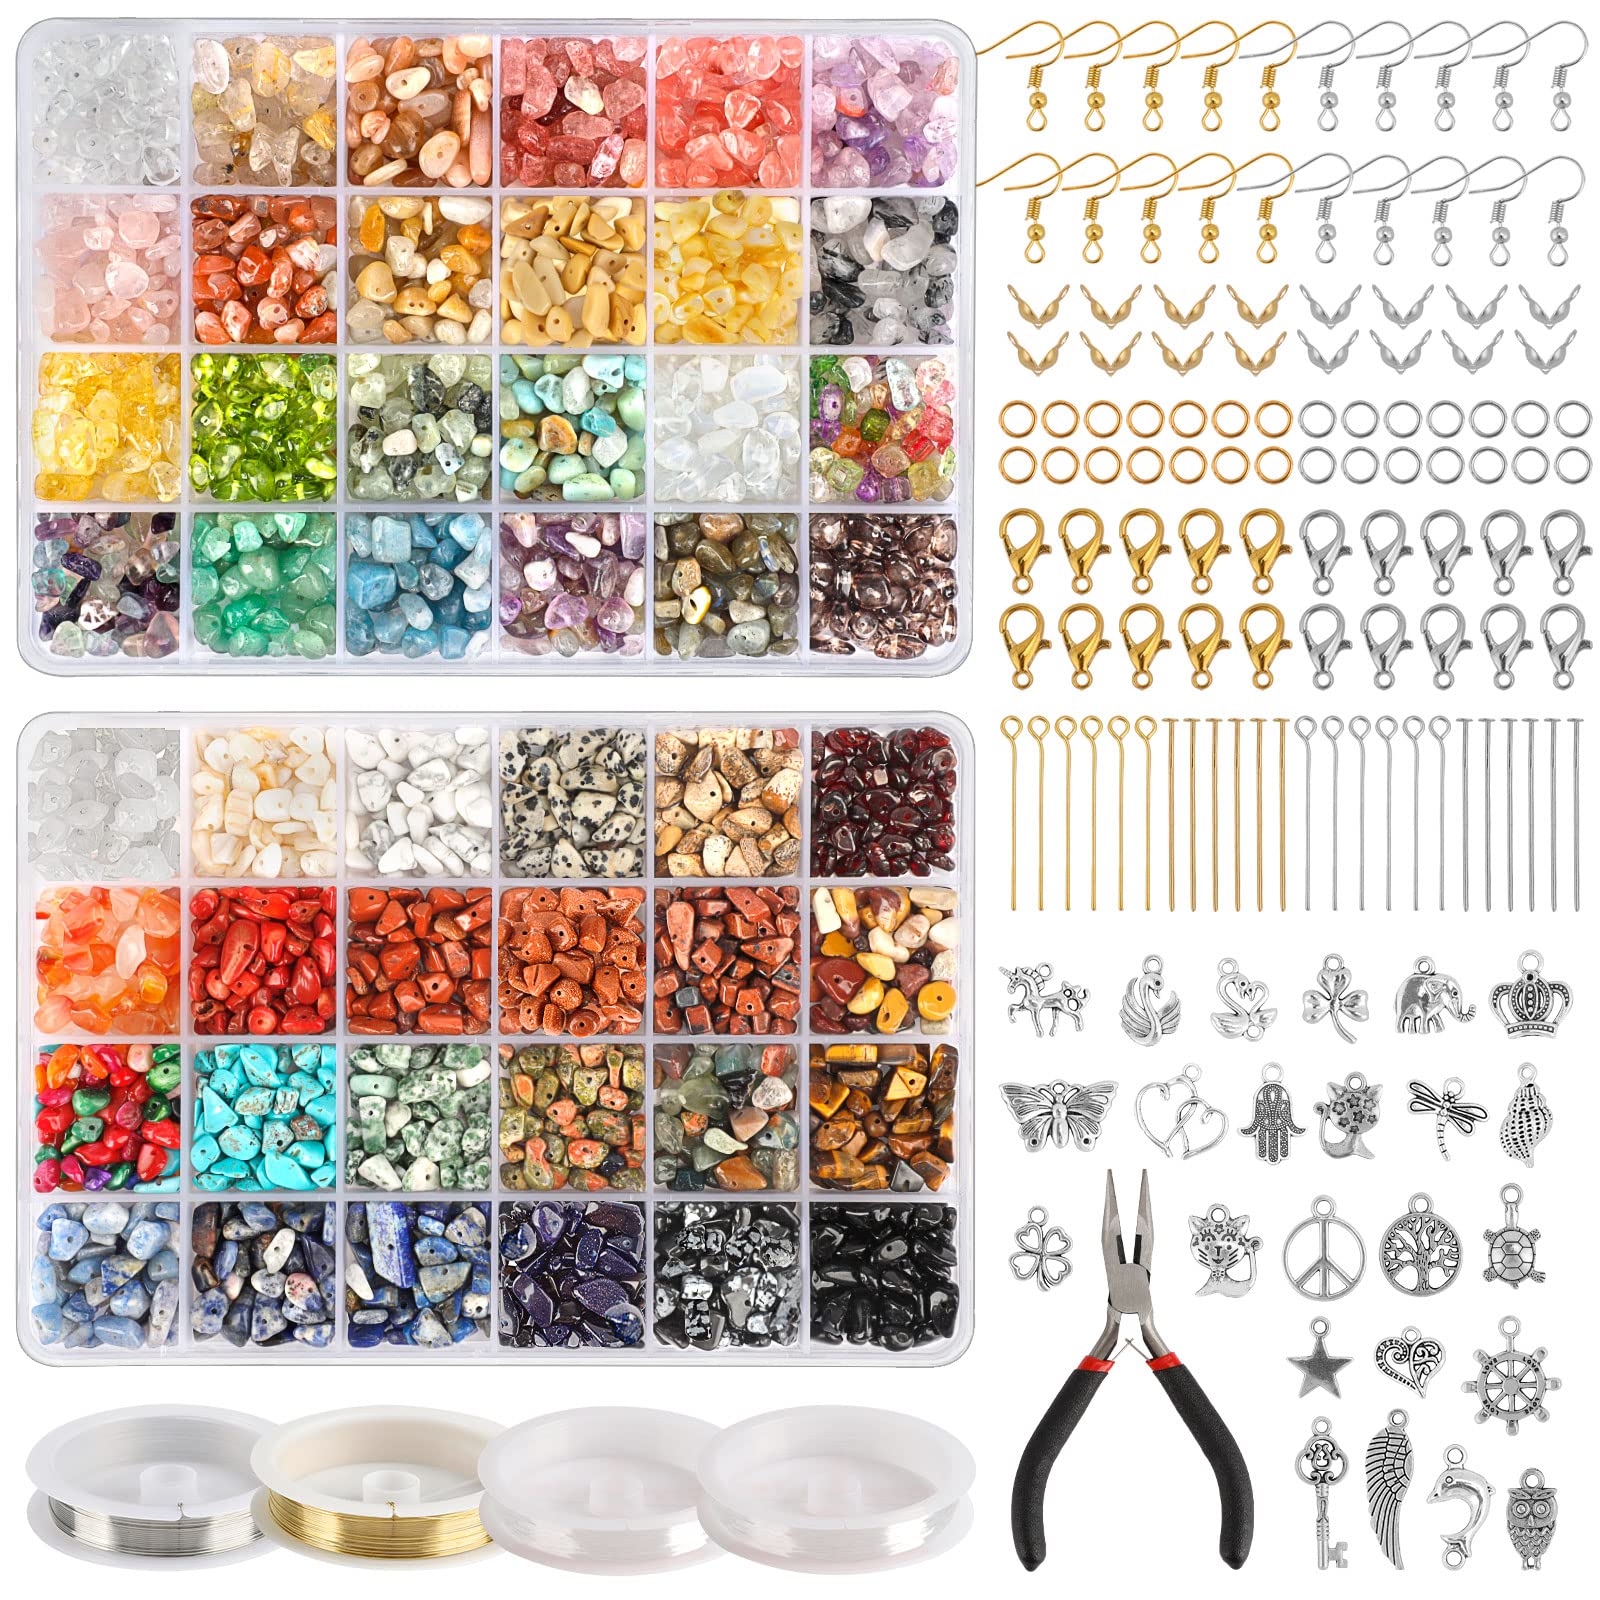 Deinduser Clay Beads 7200 Pcs 2 Boxes Bracelet Making Kit - 24 Colors  Polymer Clay Beads for Bracelet Making - Jewelry Making kit with Gift Pack  for Adults - Heishi Disc Beads